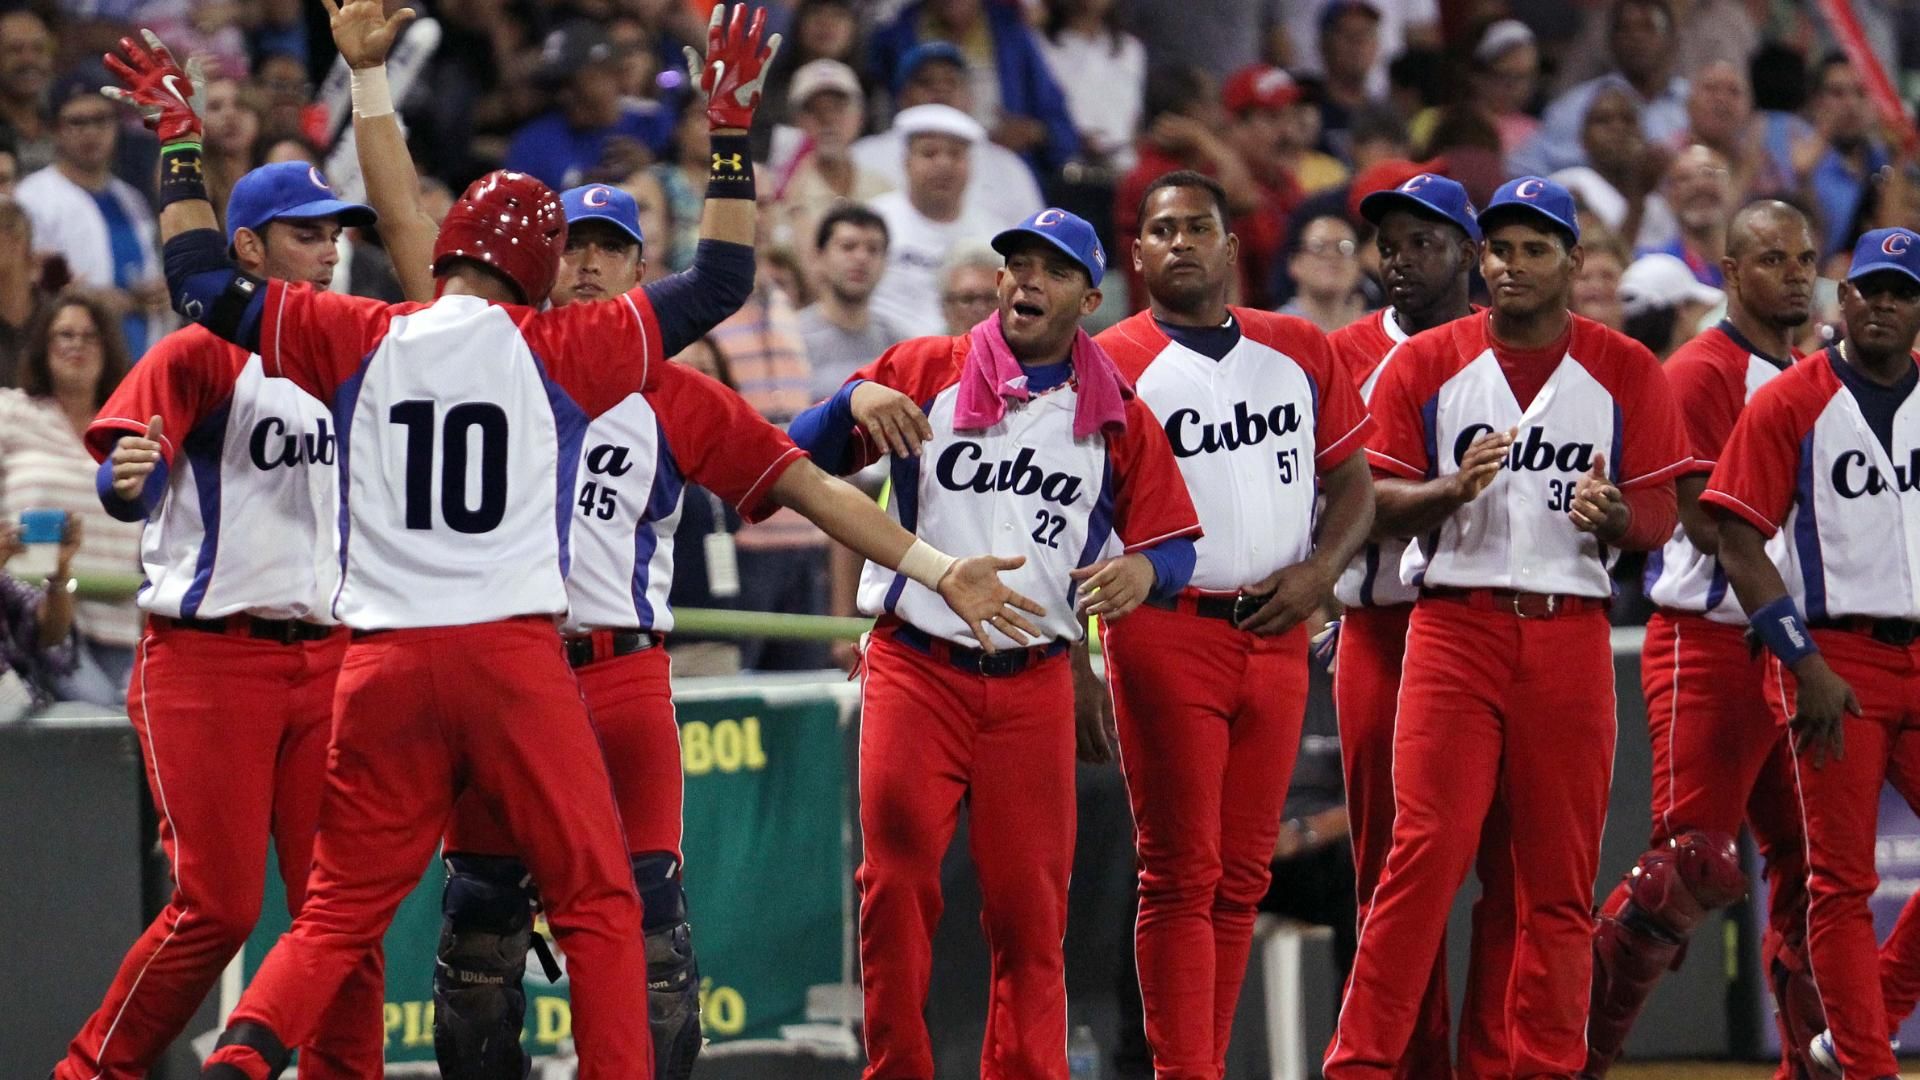 Cubanborn players on MLB rosters dip in 2015 despite highprofile